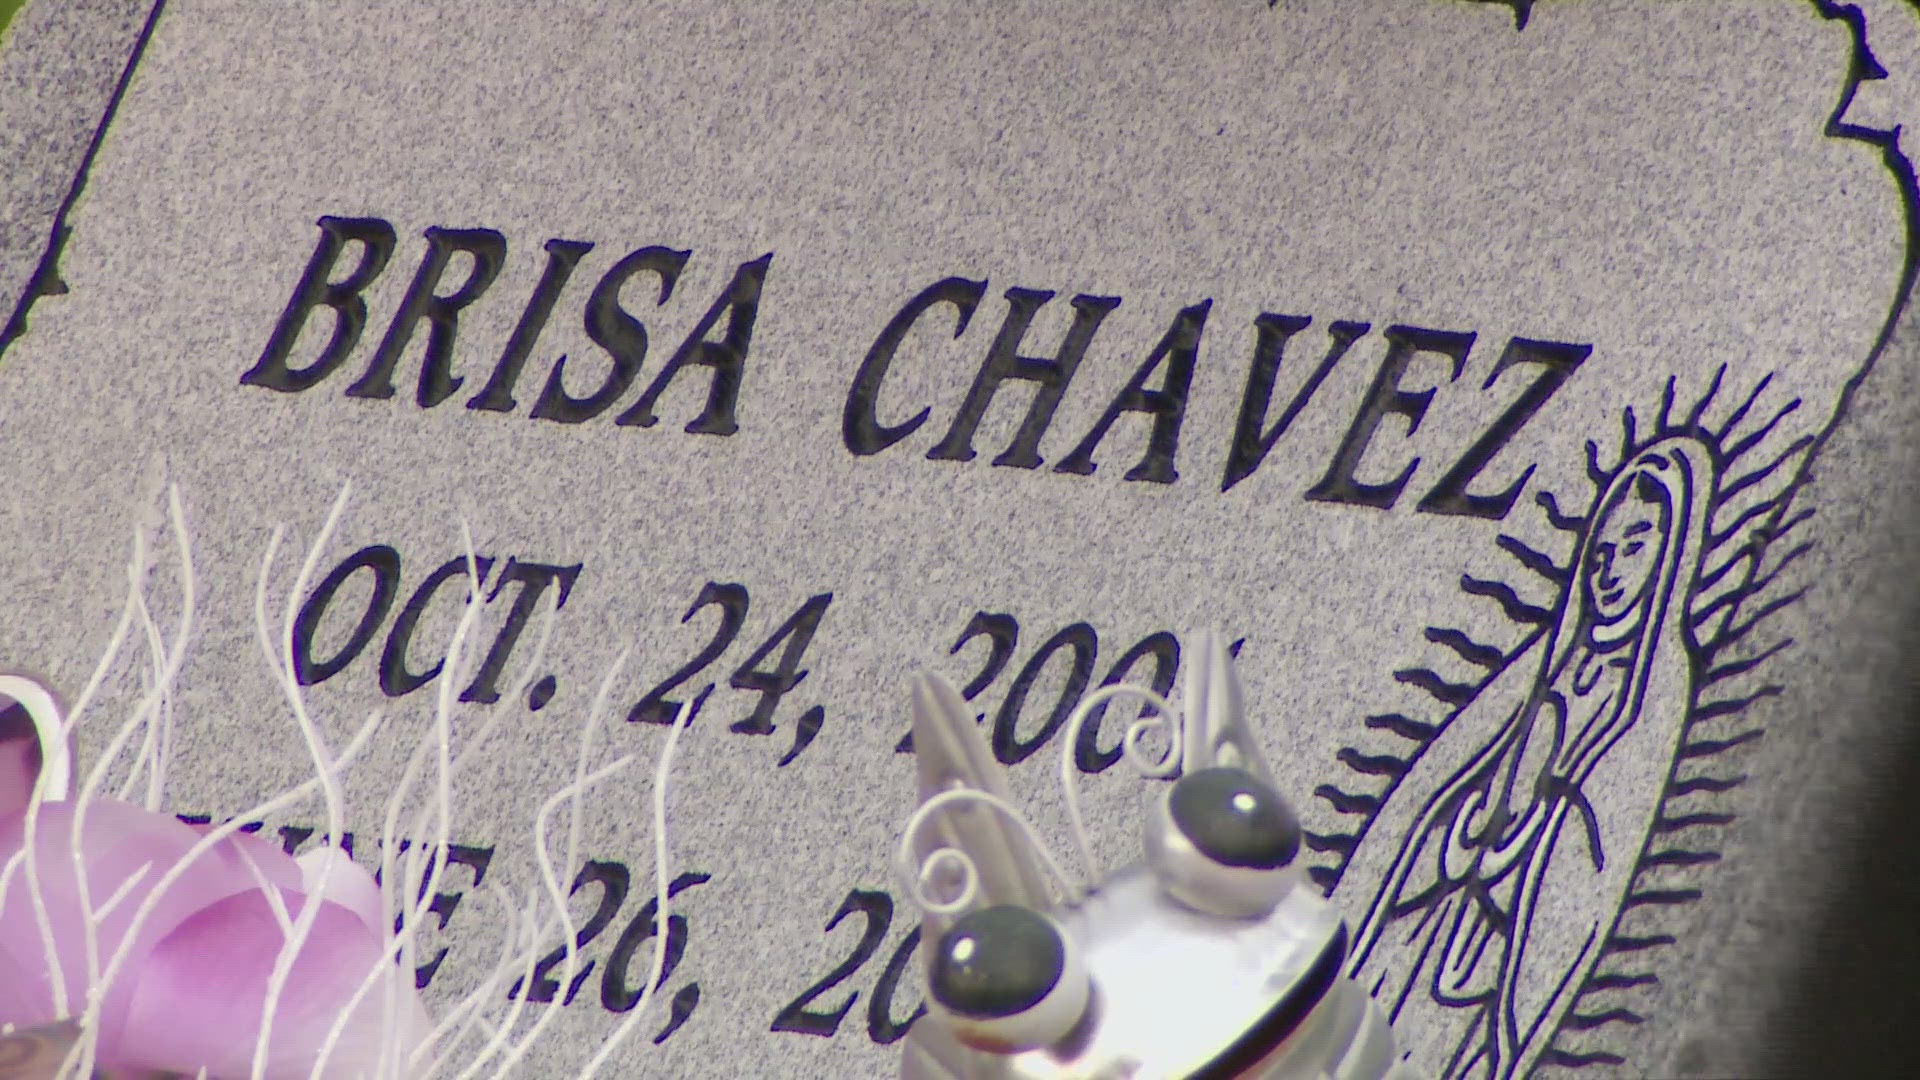 Brisa Chavez was 20 years old when she was killed at random.